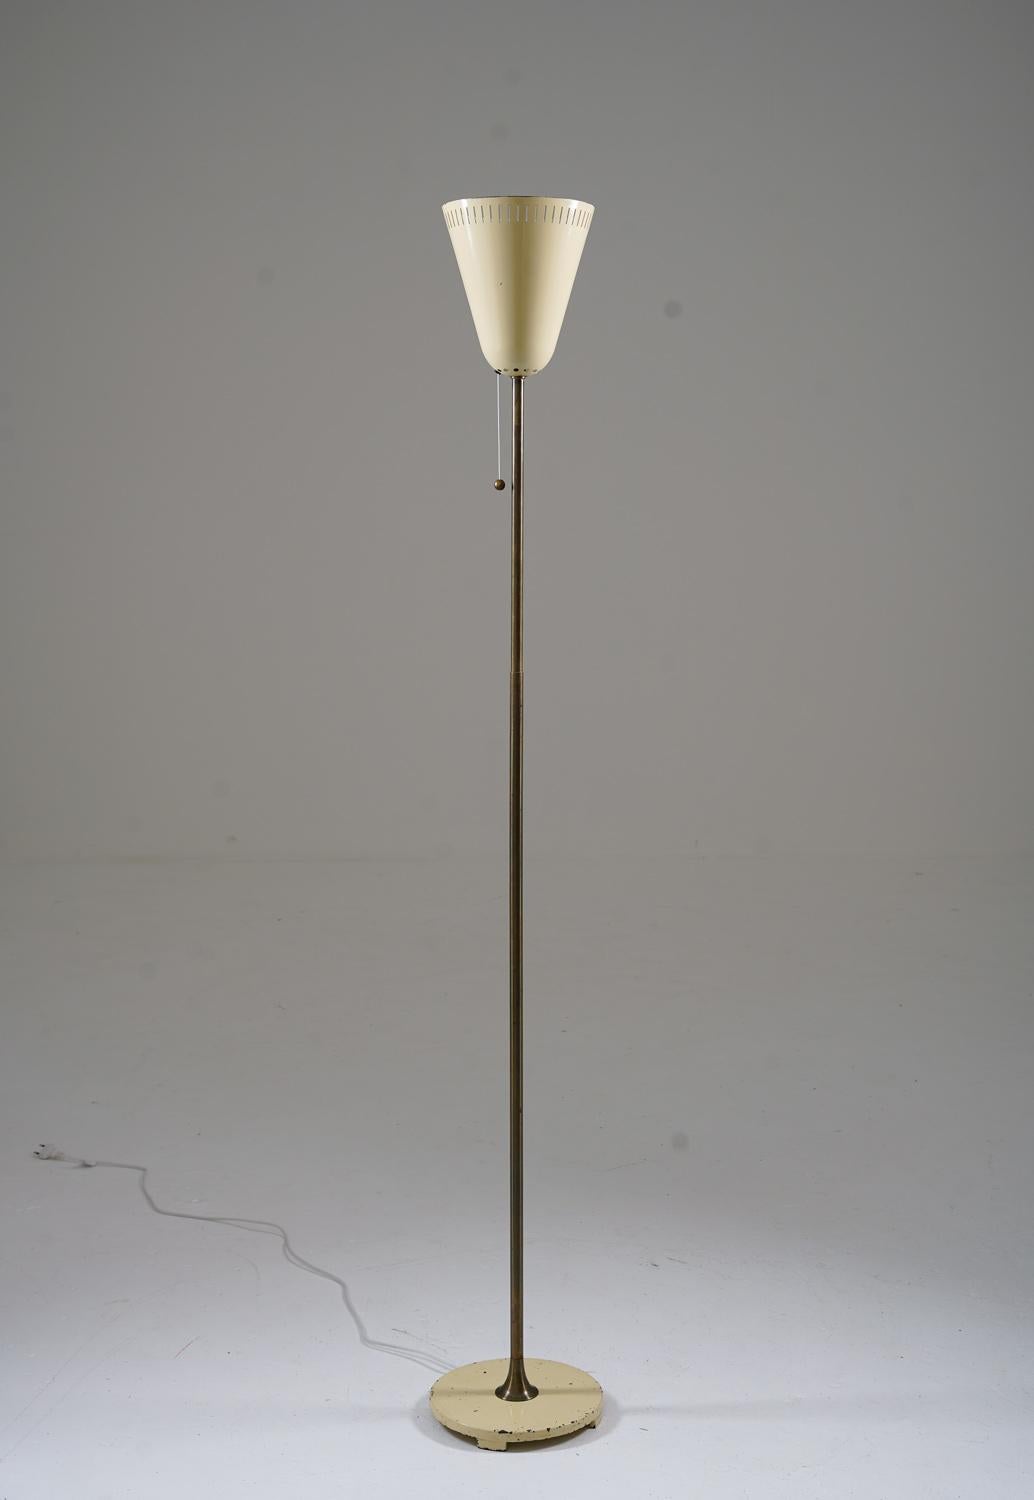 Uplight floor lamp by ASEA, Sweden, 1940s.
Beautiful lamp with a minimalistic design with beautiful details. The base has its original cream-white paint, while the rod is made of brass. The light source is hidden by a perforated metal shade in the